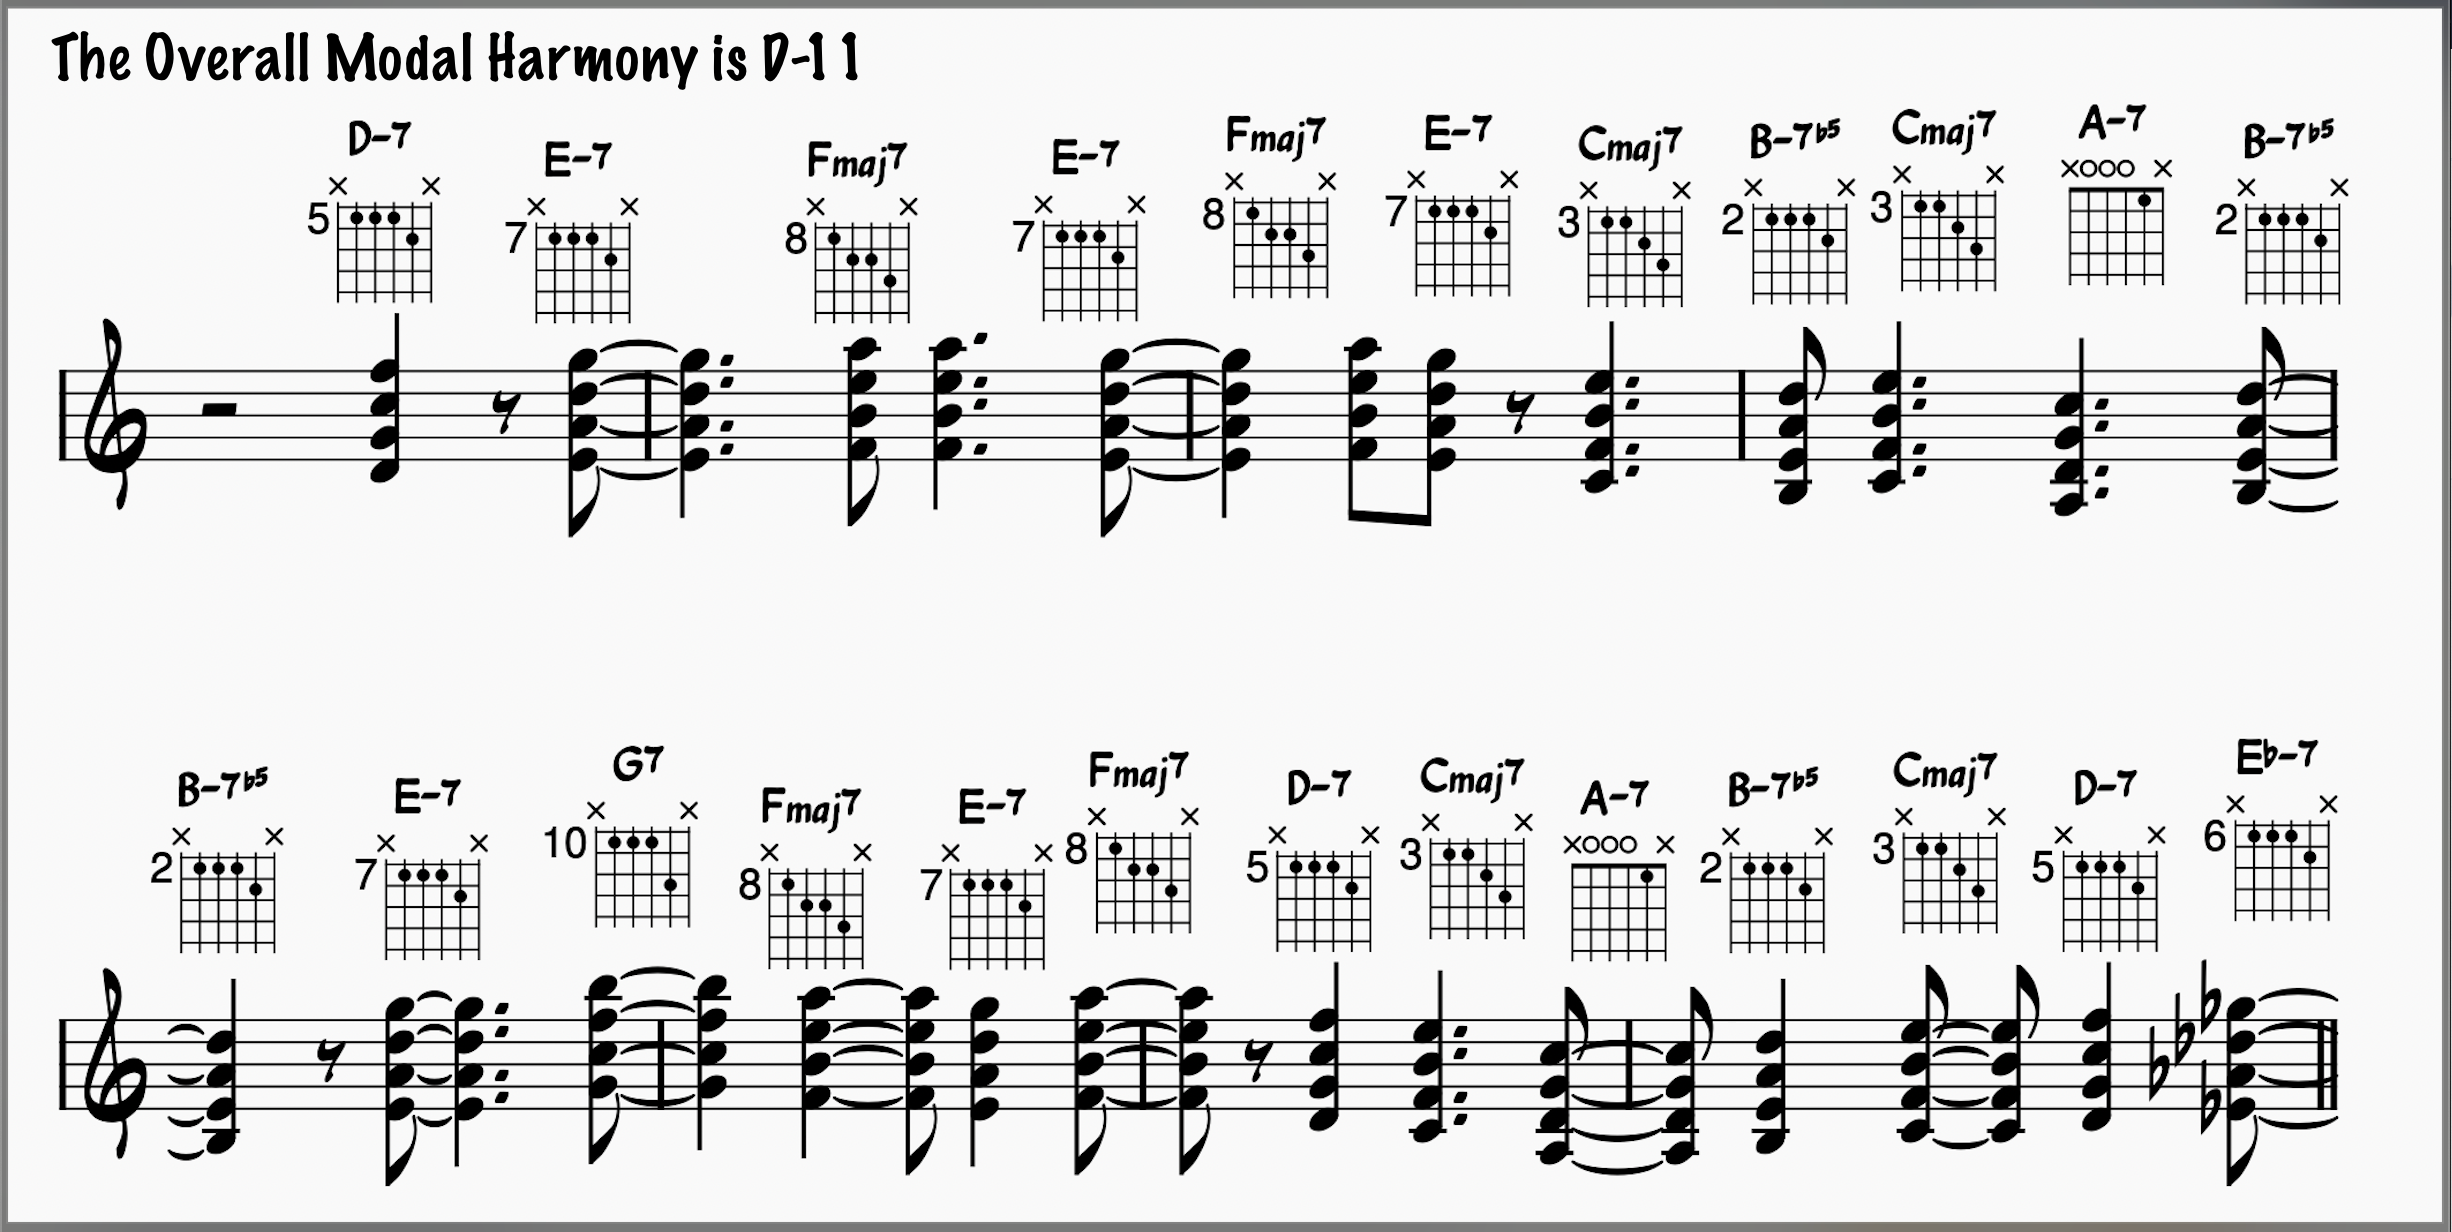 Second A of the modal tune Impressions with chord comping and chord charts.